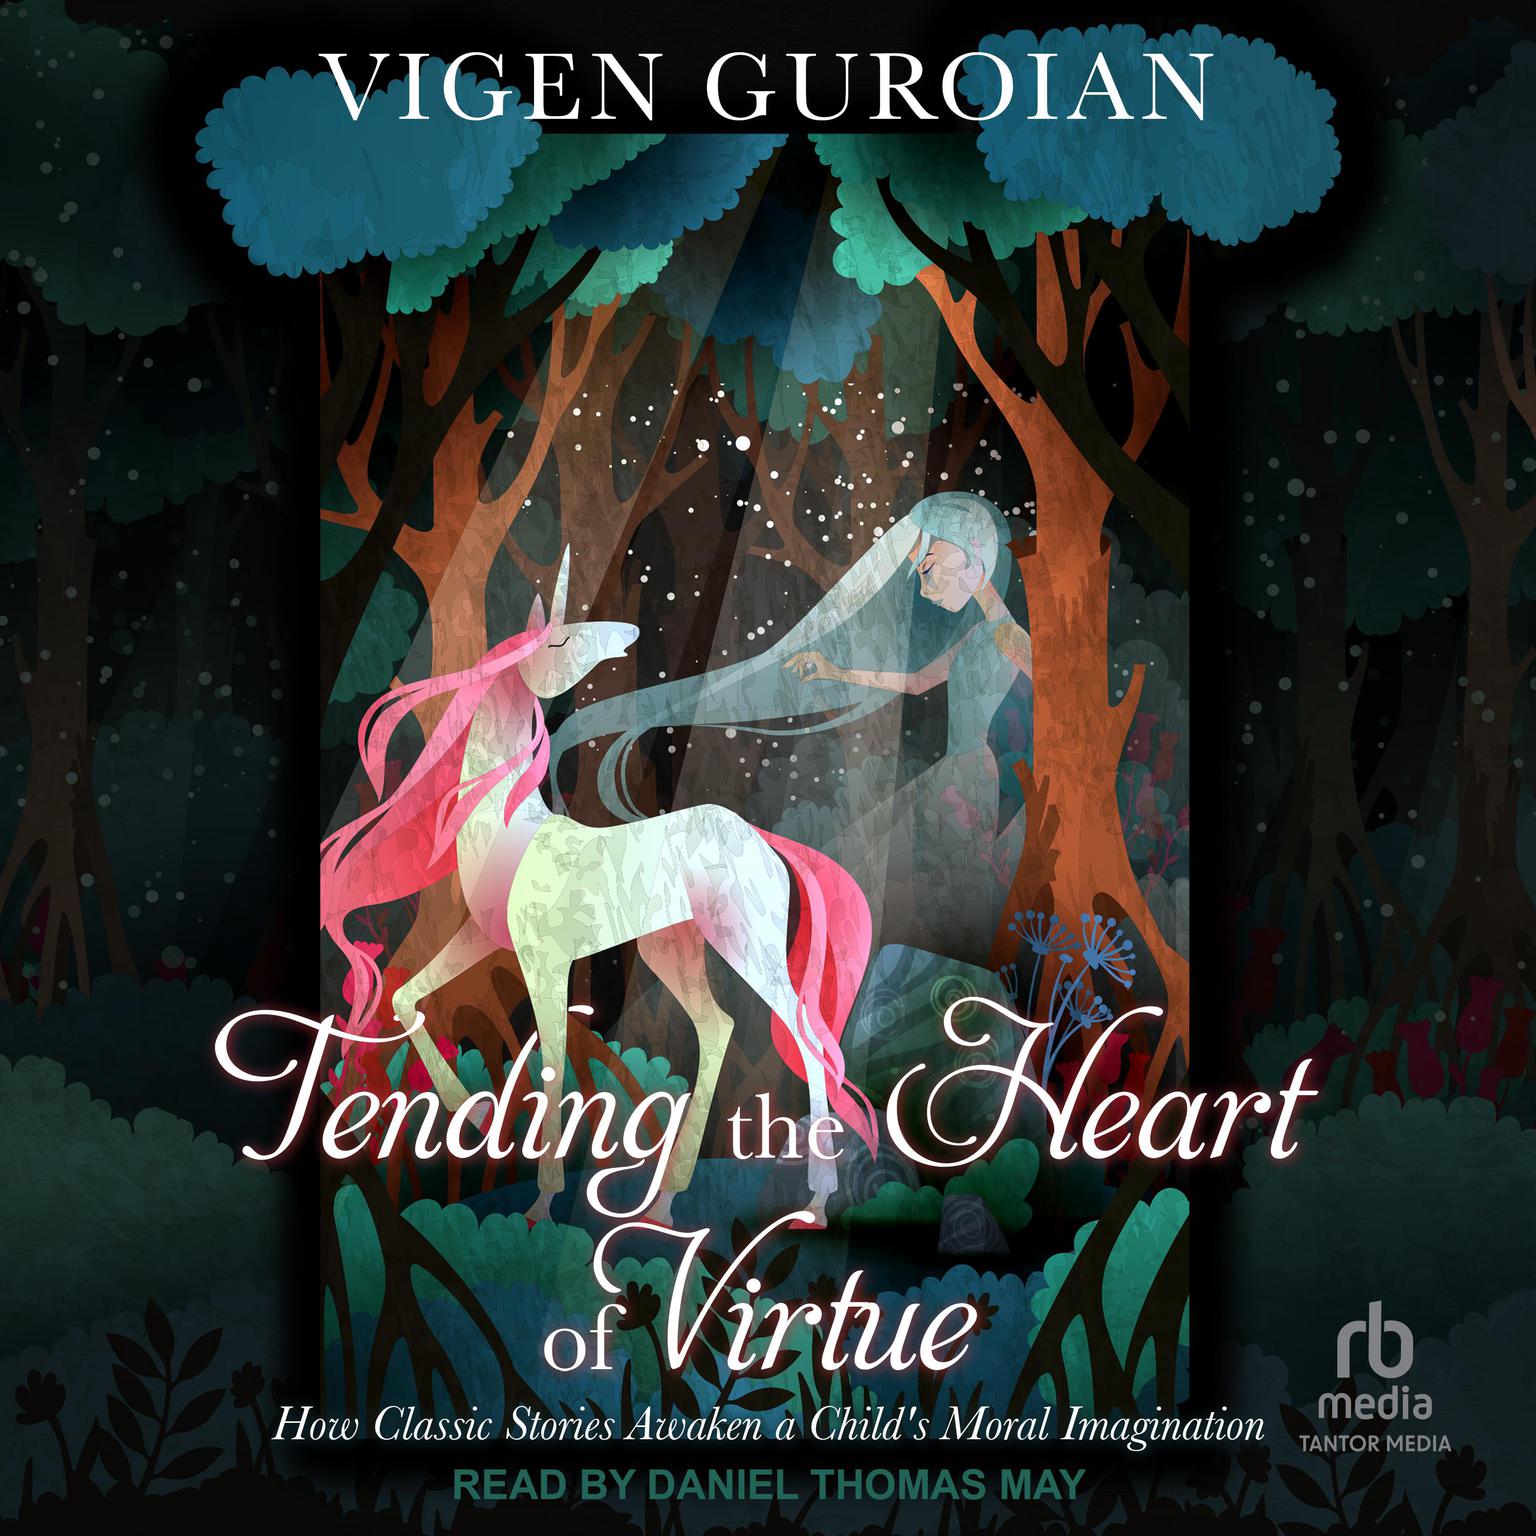 Tending the Heart of Virtue: How Classic Stories Awaken a Childs Moral Imagination, 2nd edition Audiobook, by Vigen Guroian